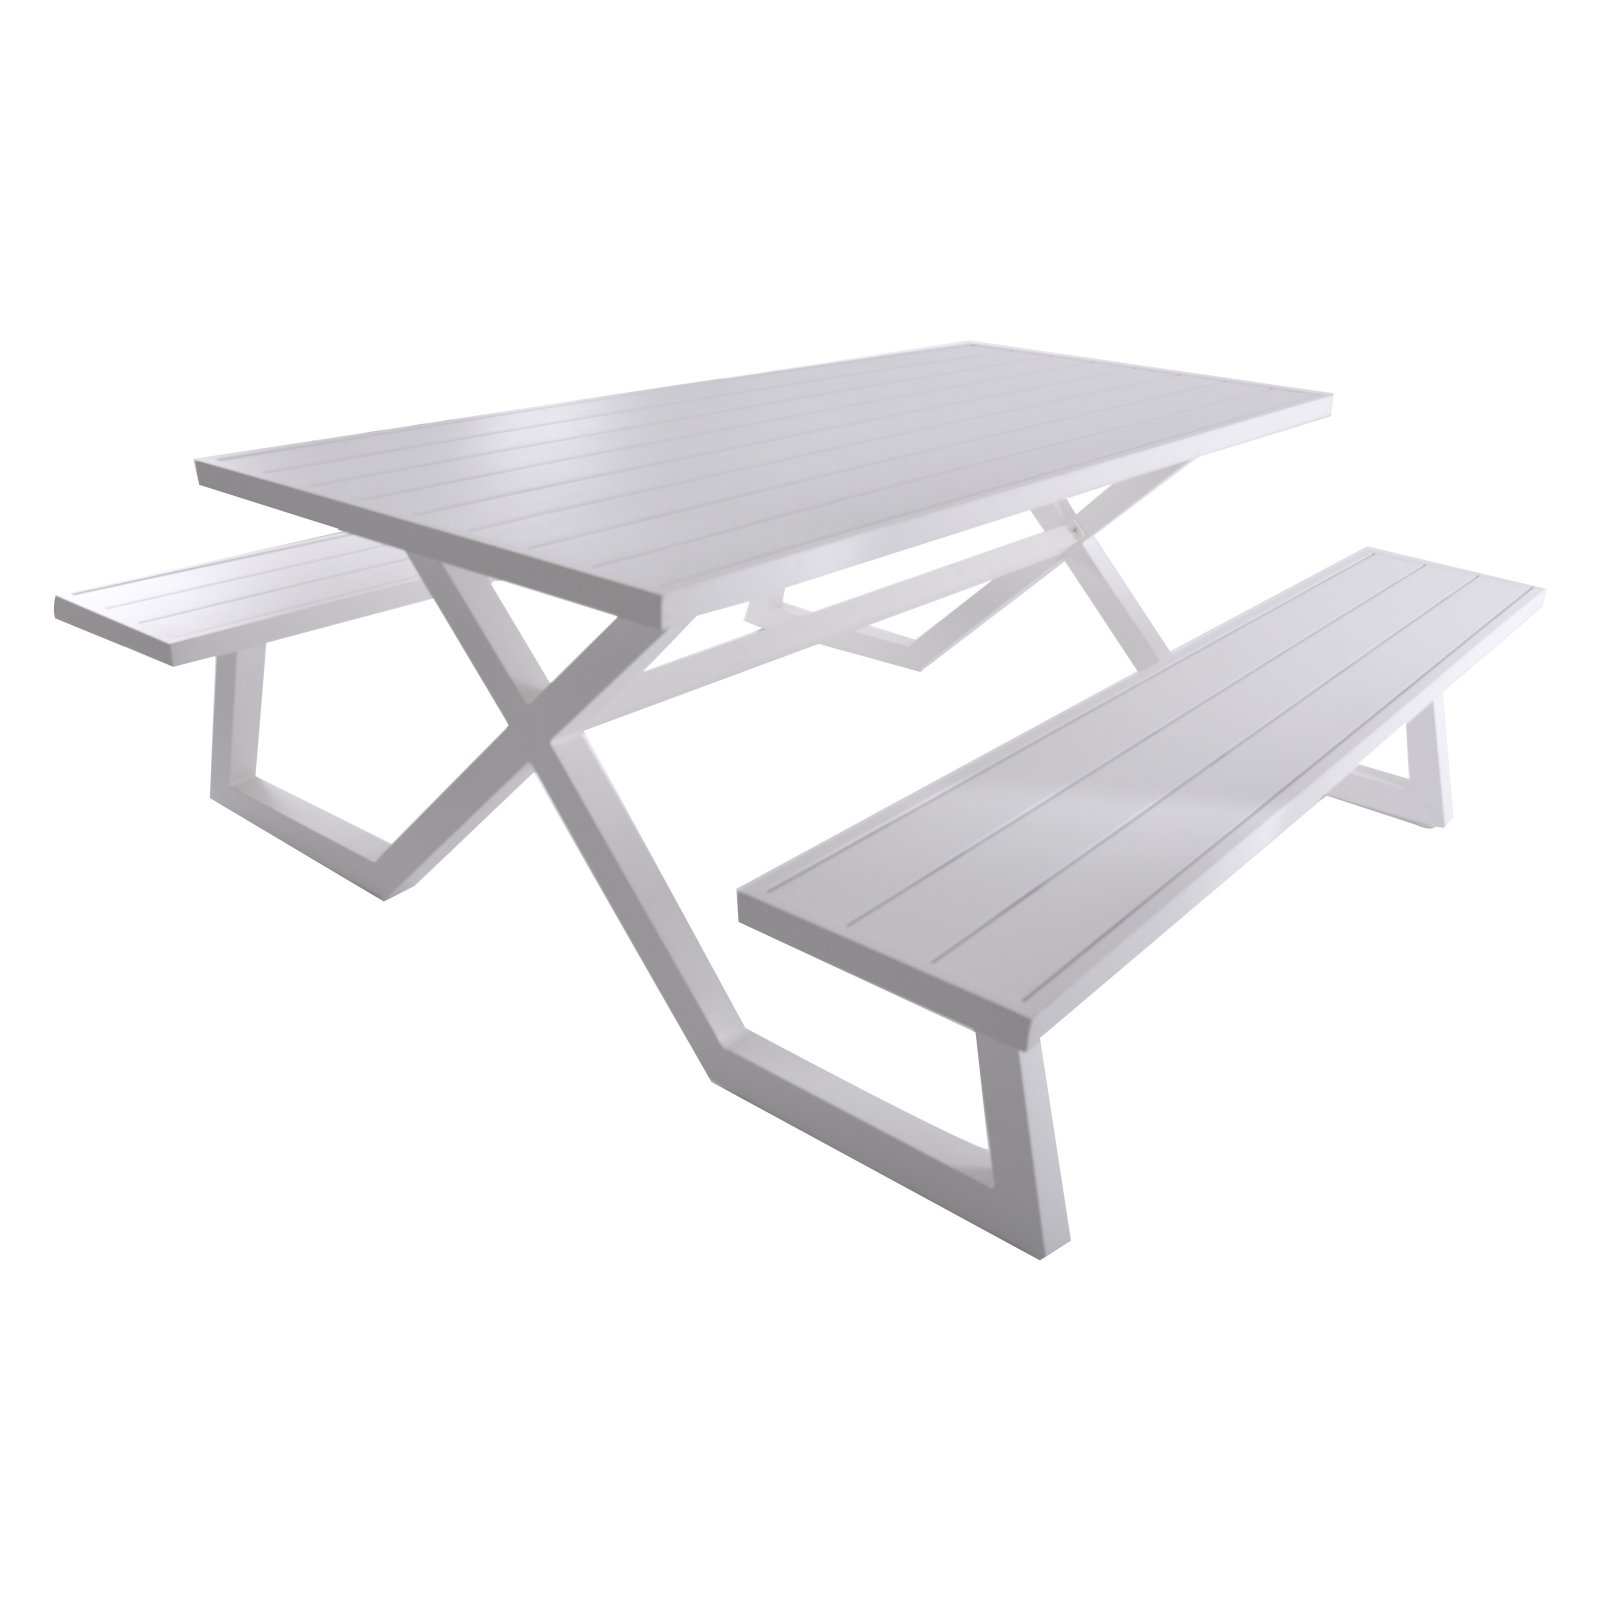 Vivere Banquet Deluxe Picnic Table - image 2 of 4